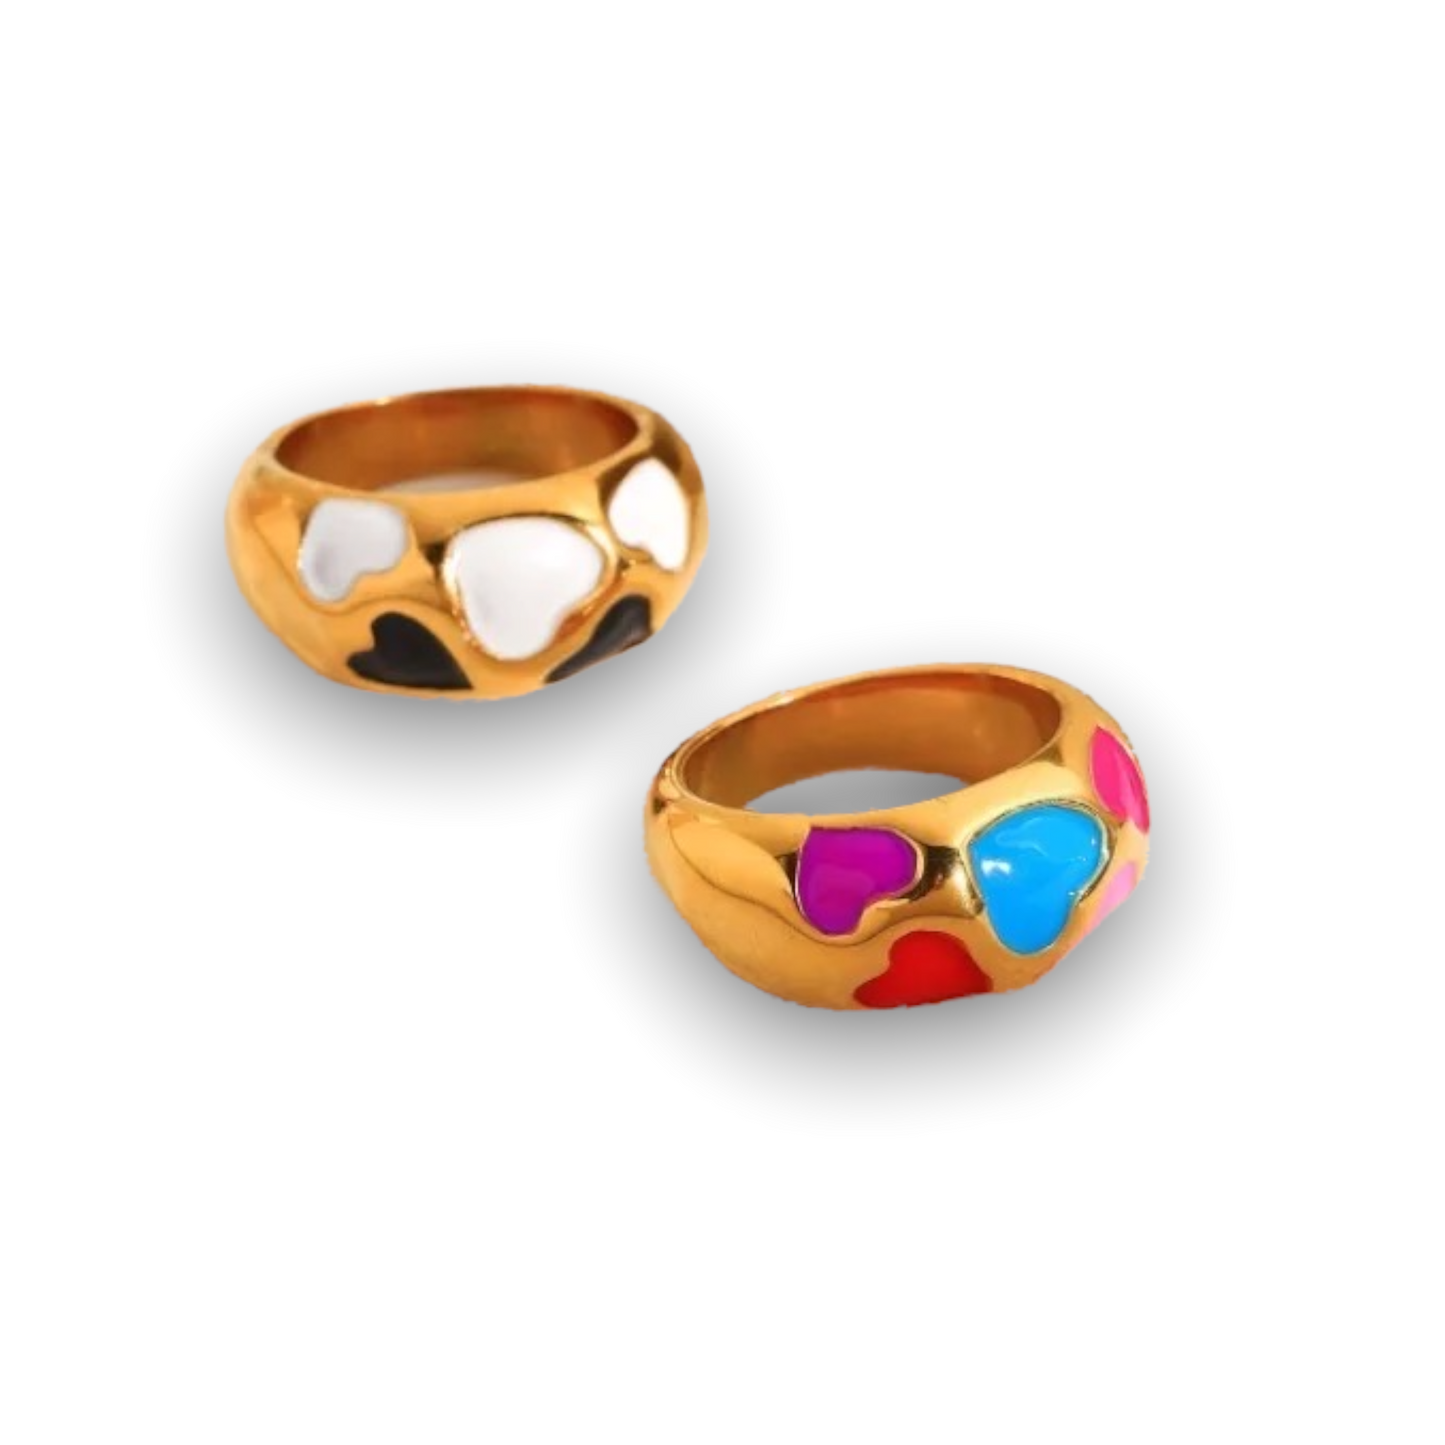 "Ring of Hearts" Rings